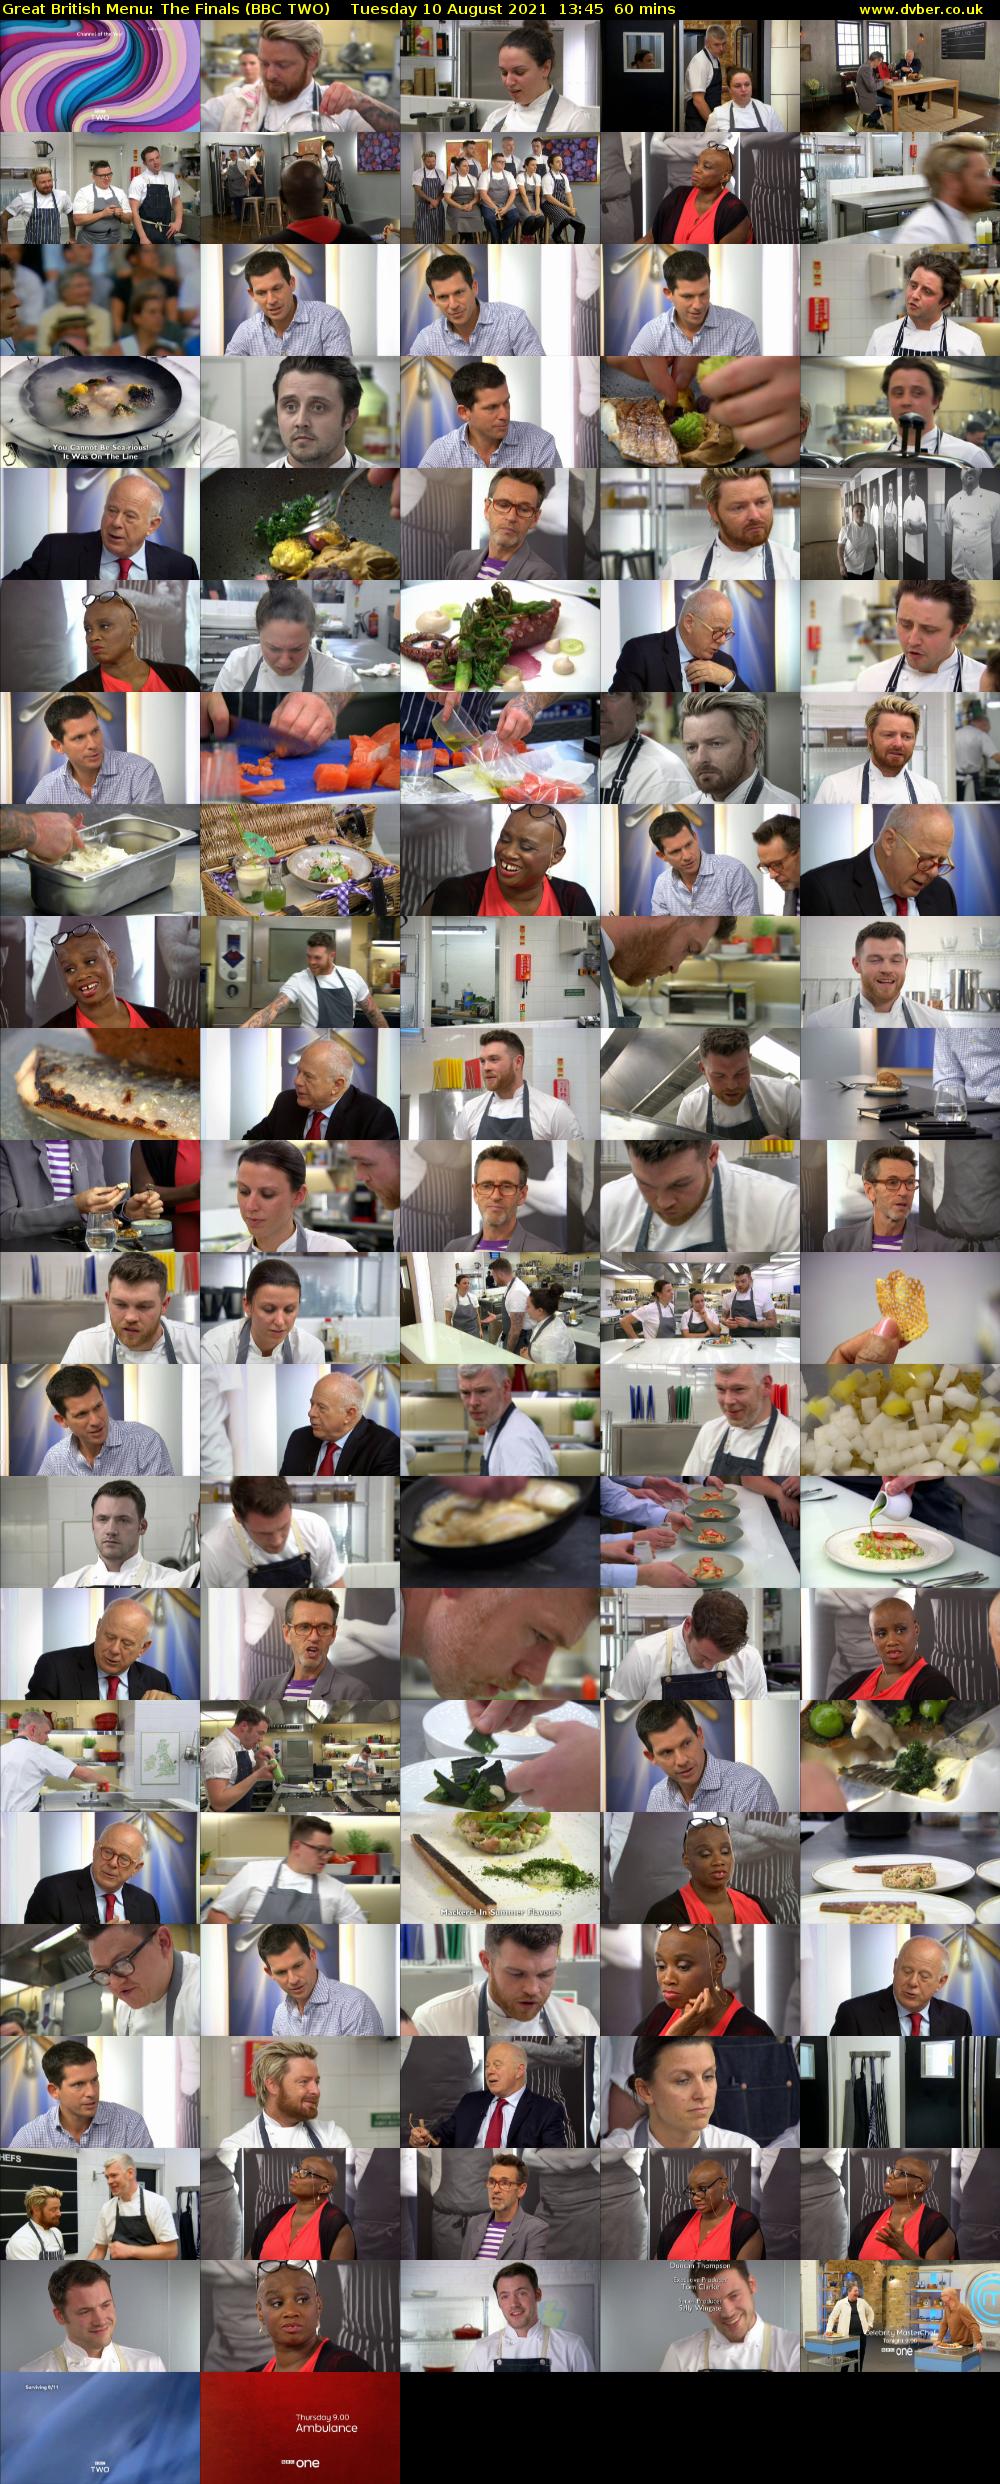 Great British Menu: The Finals (BBC TWO) Tuesday 10 August 2021 13:45 - 14:45